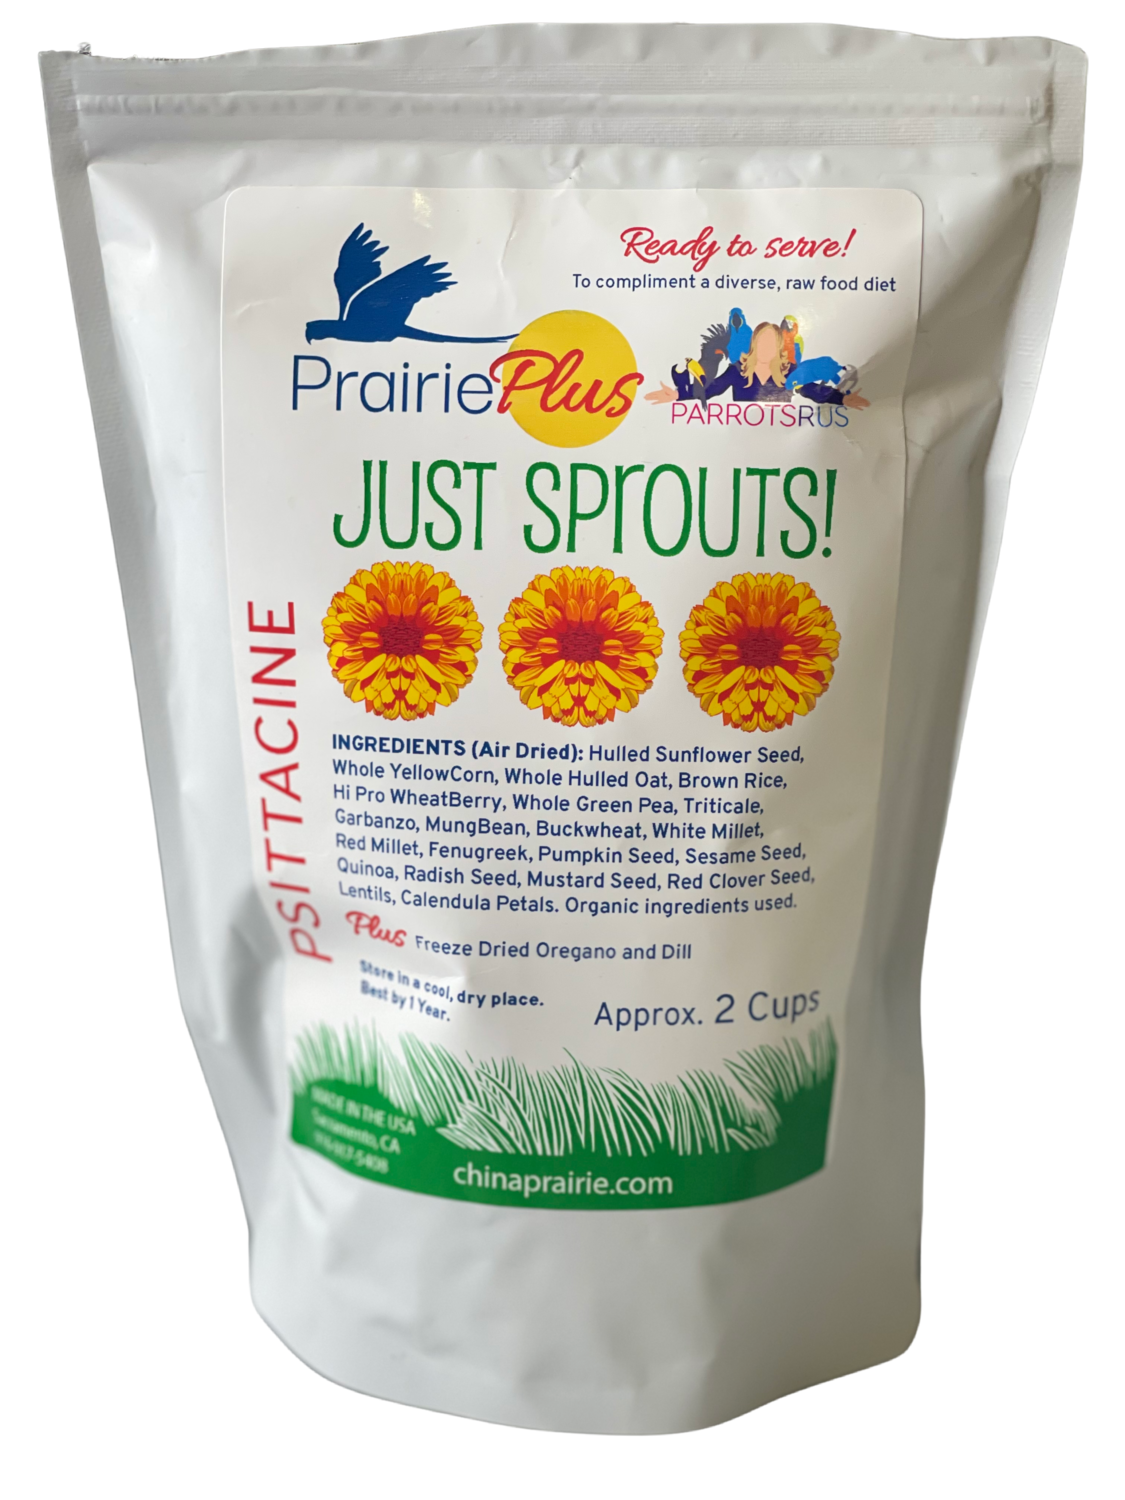 Just Sprouts! Psittacine - Prairie Plus Air Dried Sprouts -- 2 Cups